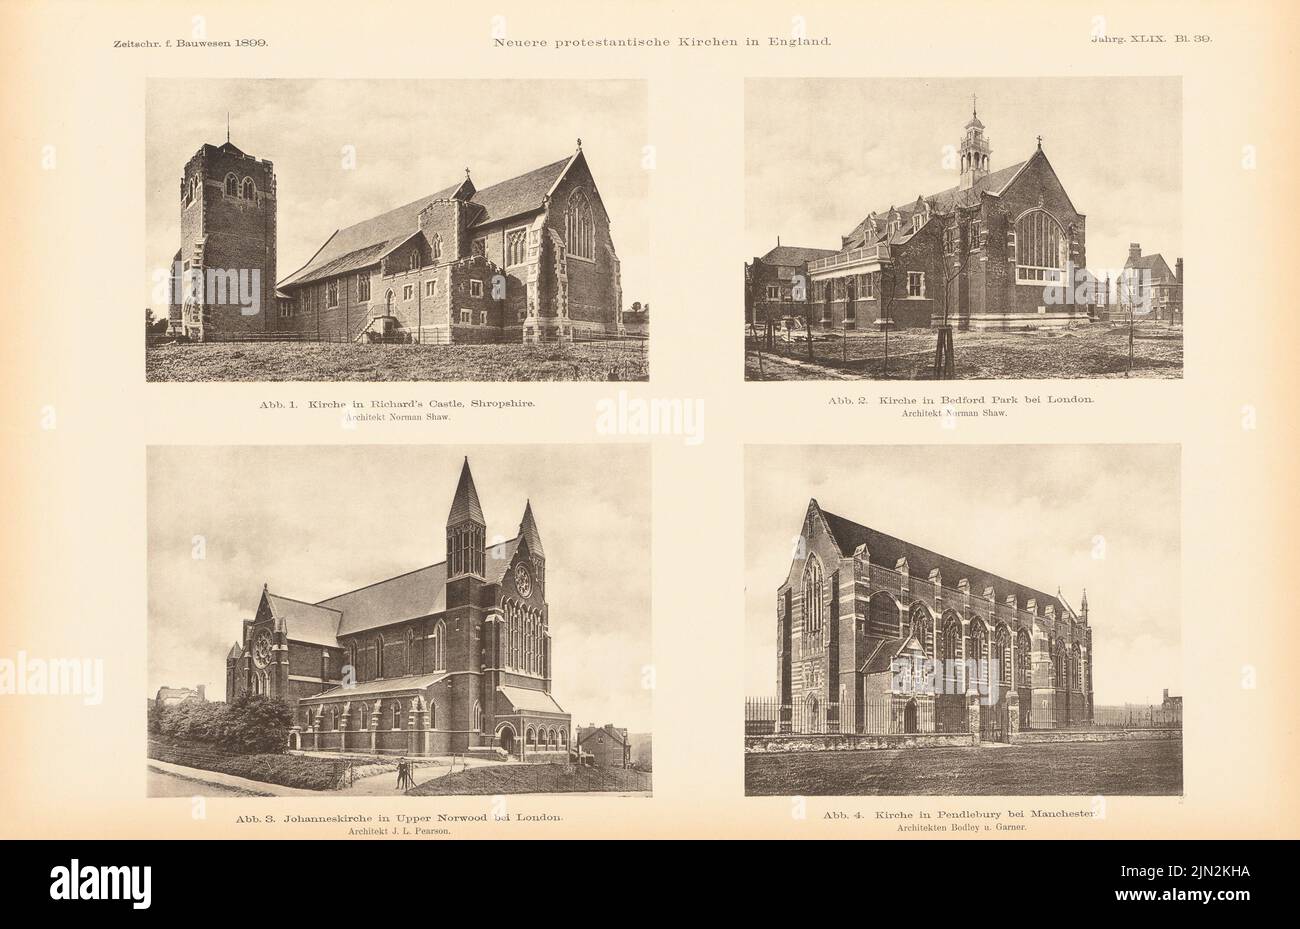 Shaw Norman (1831-1912), newer Protestant churches in England. (From: Atlas to the magazine for Building, ed. V. Ministry of Public Work, Jg. 49, 1899): Views of the churches in Richards Castle, Bedford Park, Upper Norwood, Pendlebury. Pressure on paper, 27.8 x 43.1 cm (including scan edges) Stock Photo